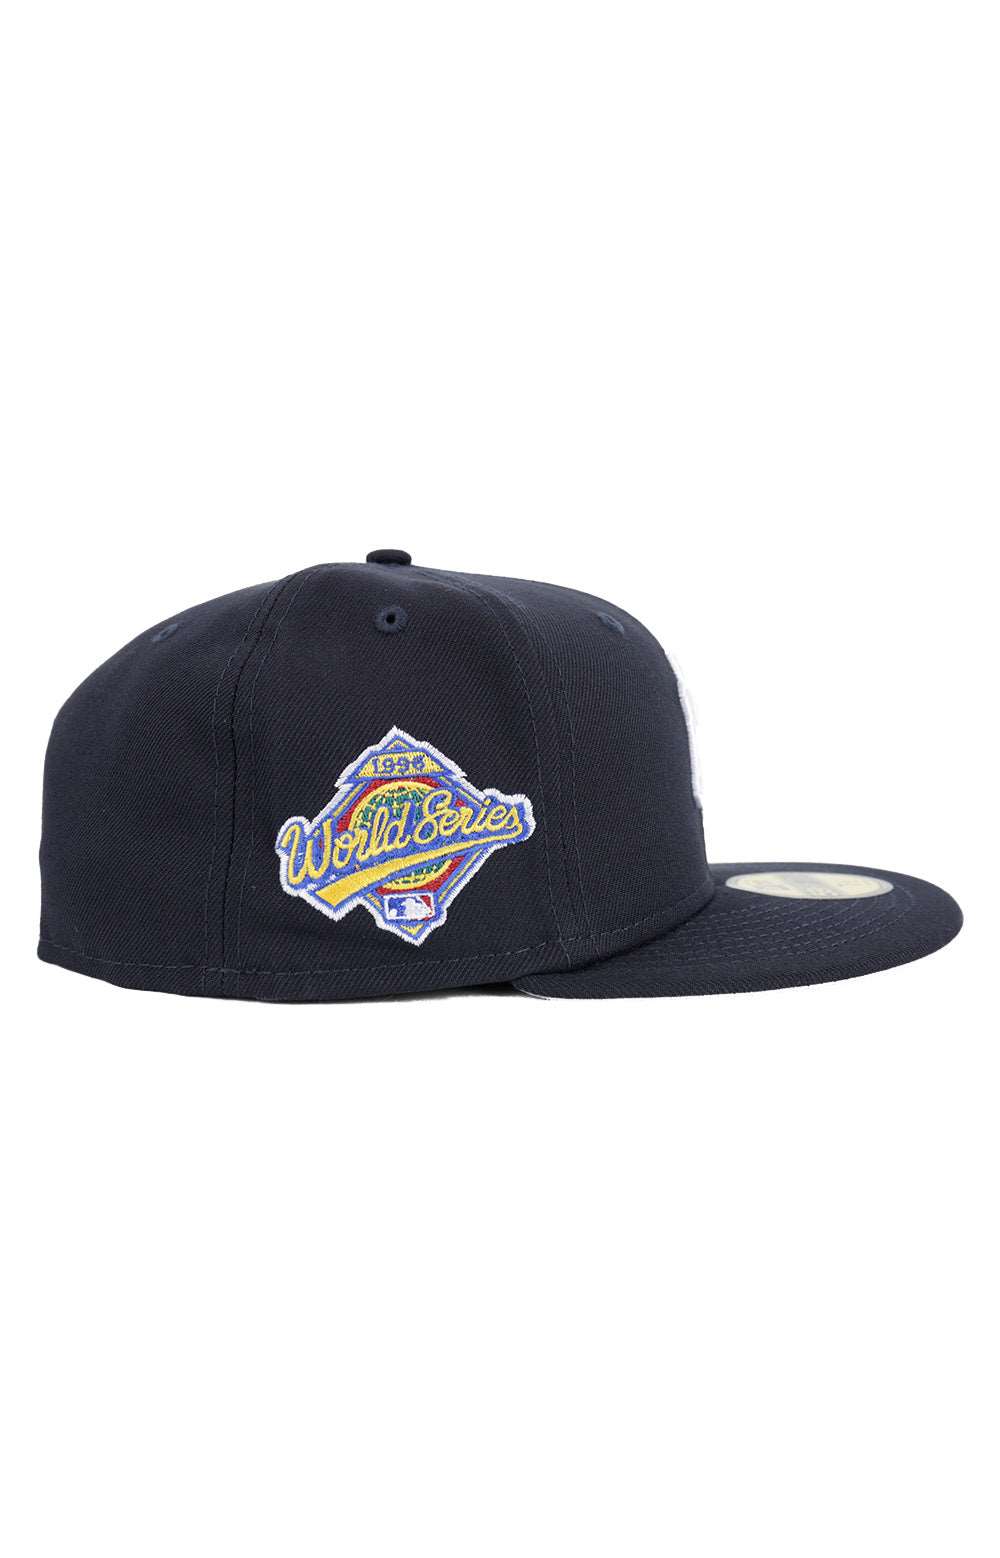 NY Yankees 96 World Series Side Patch 59Fifty Fitted Hat